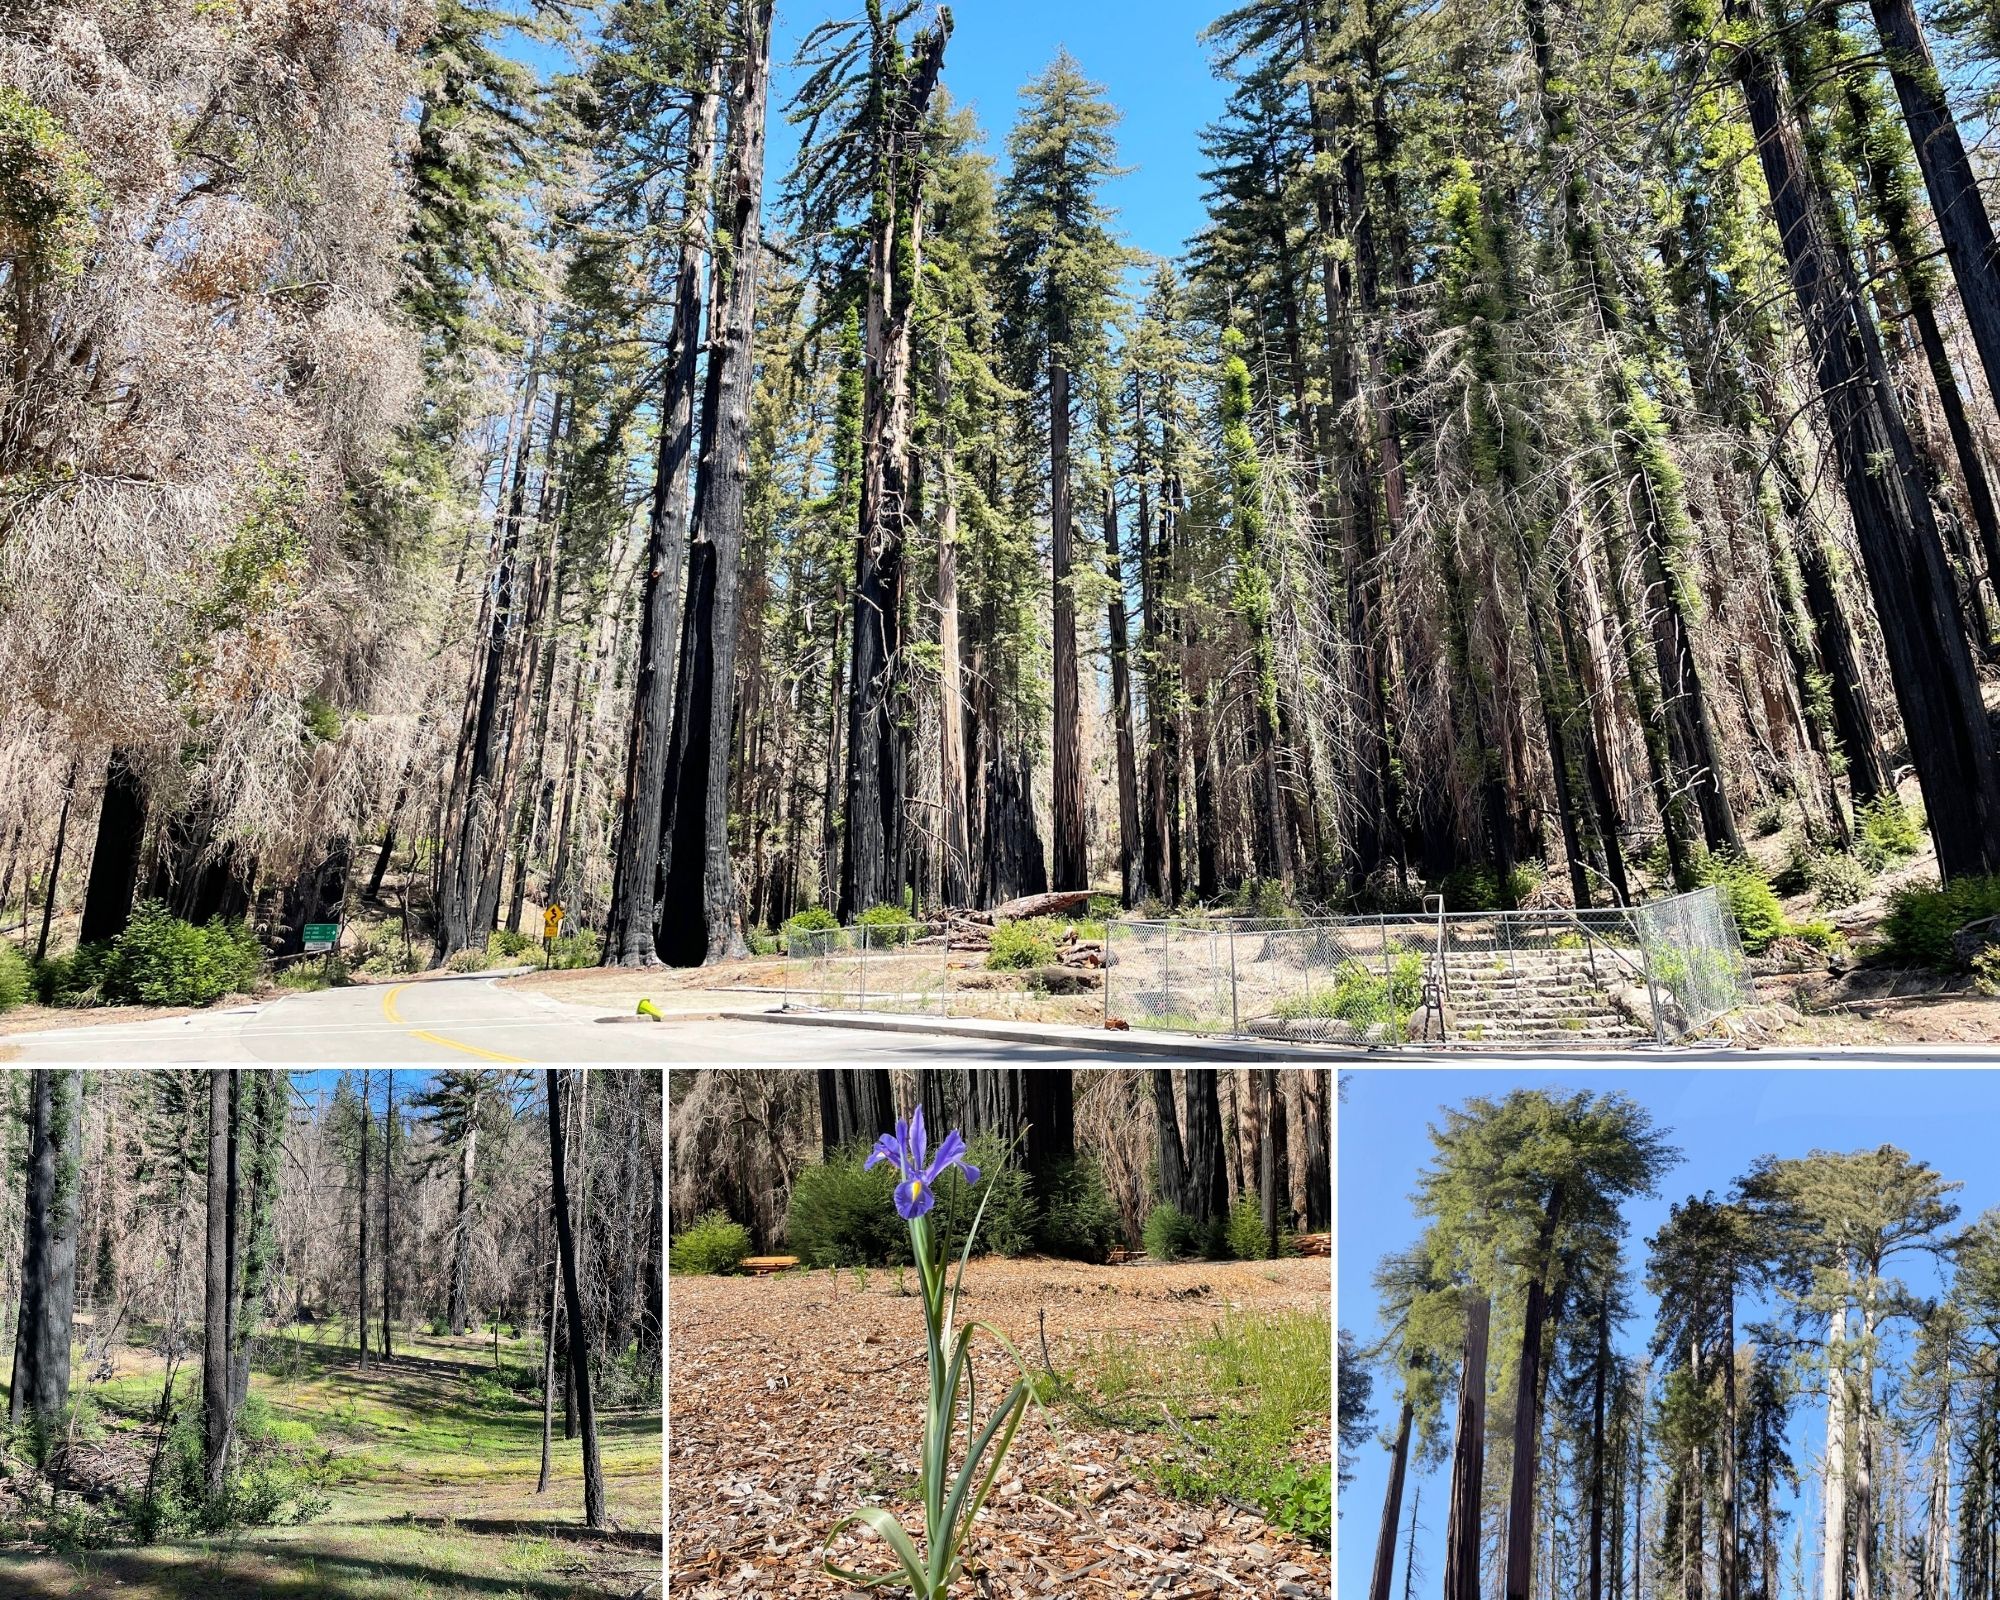 Regrowth can be seen throughout Big Basin Redwoods State Park this spring.